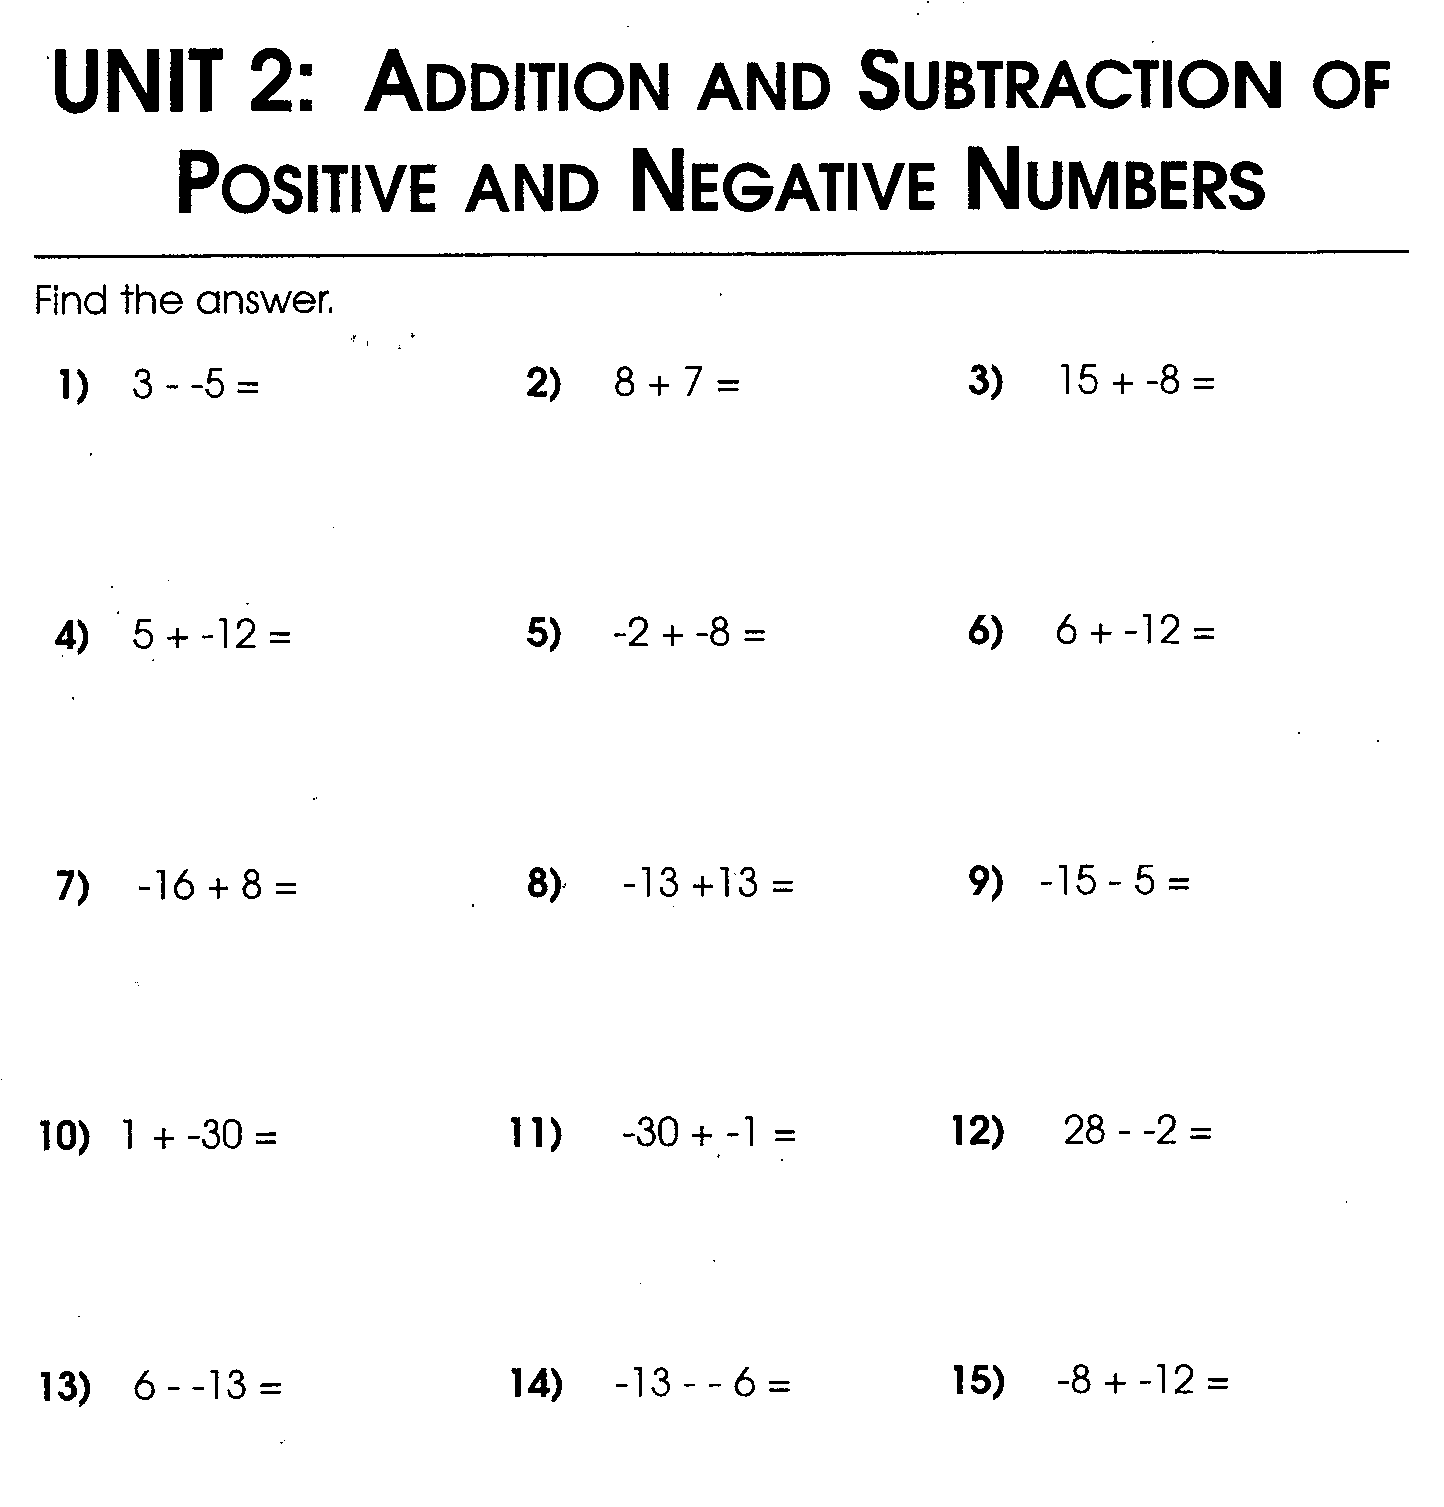 Add And Subtract Positive And Negative Mixed Numbers Worksheet